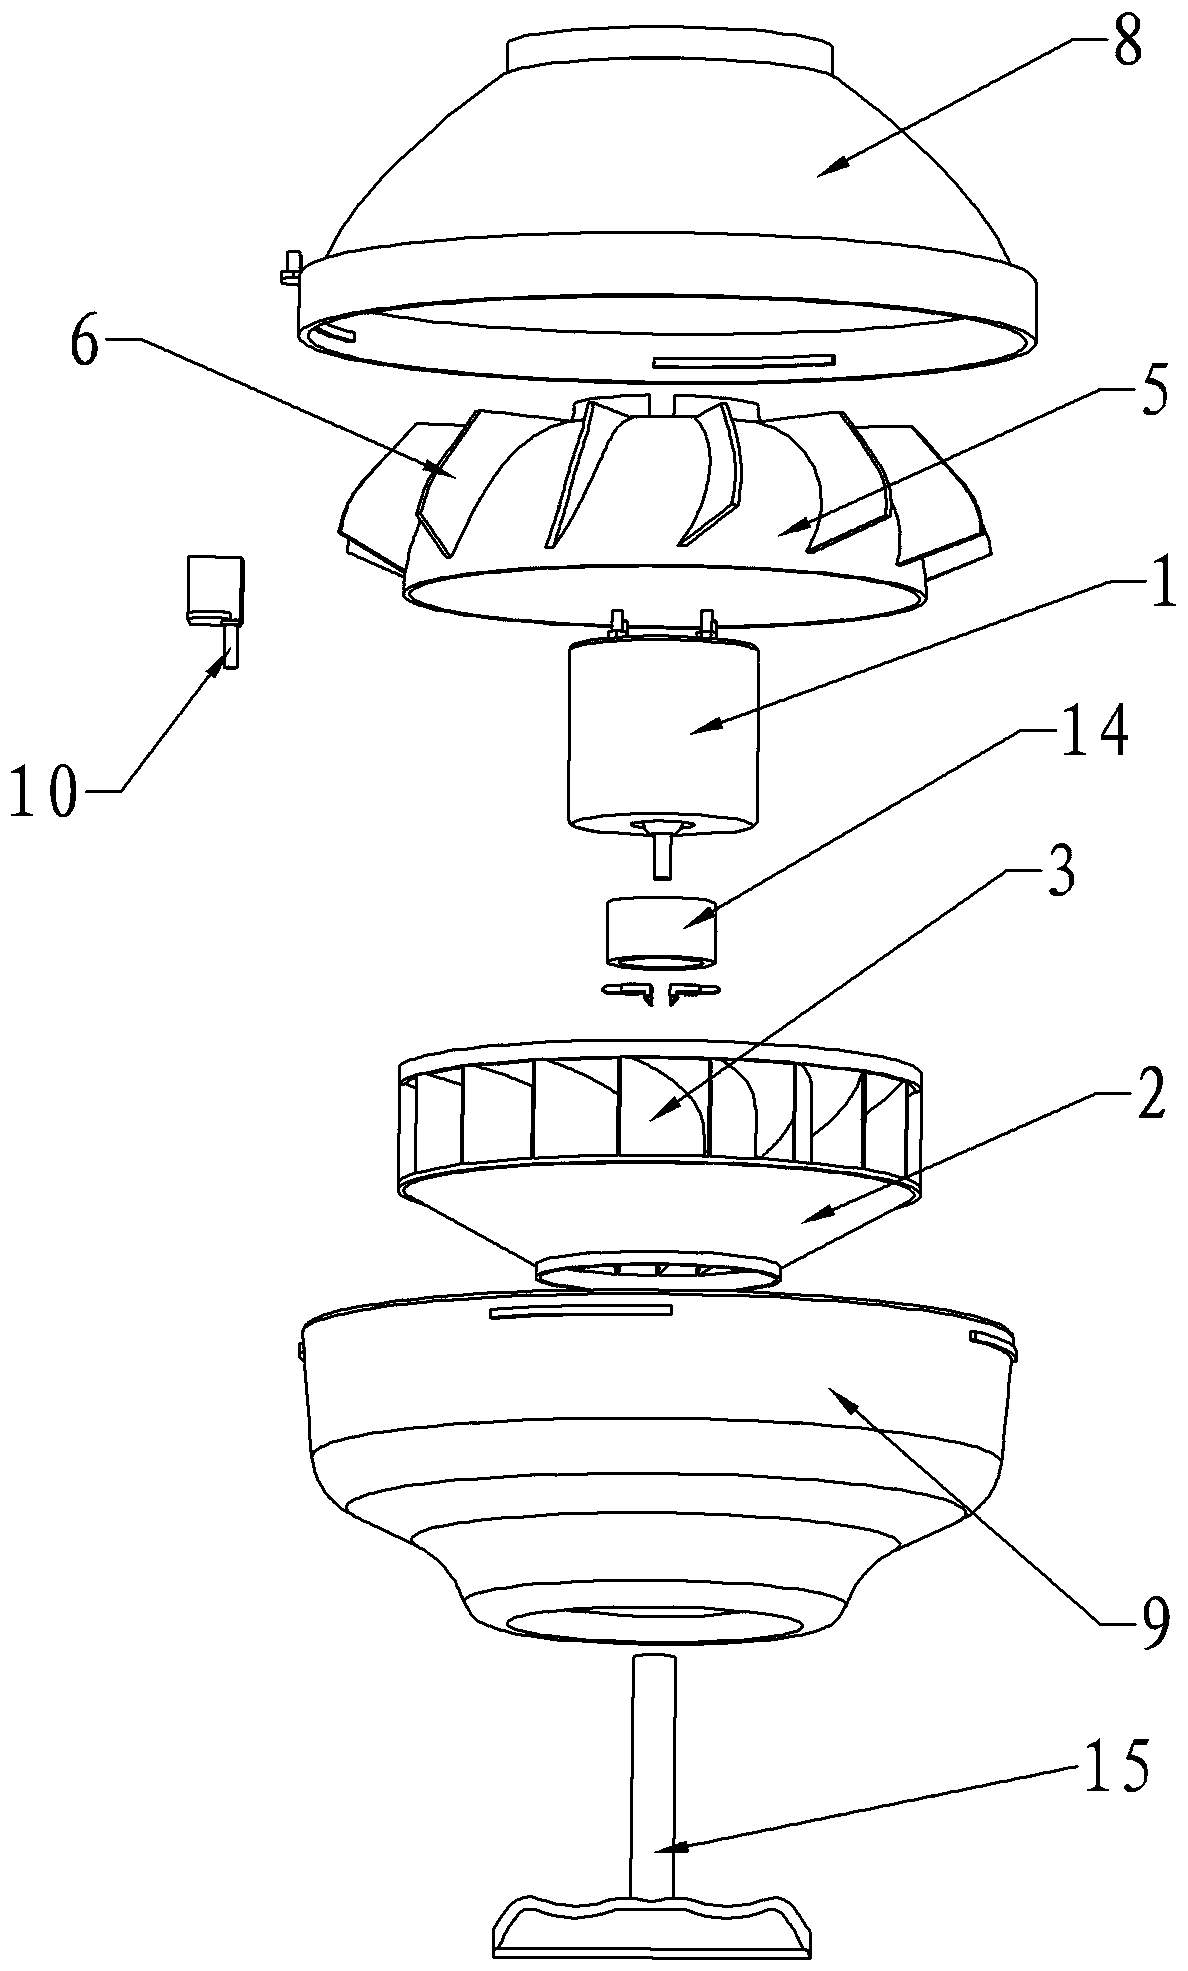 High-performance axial-flow fan for extractor hood